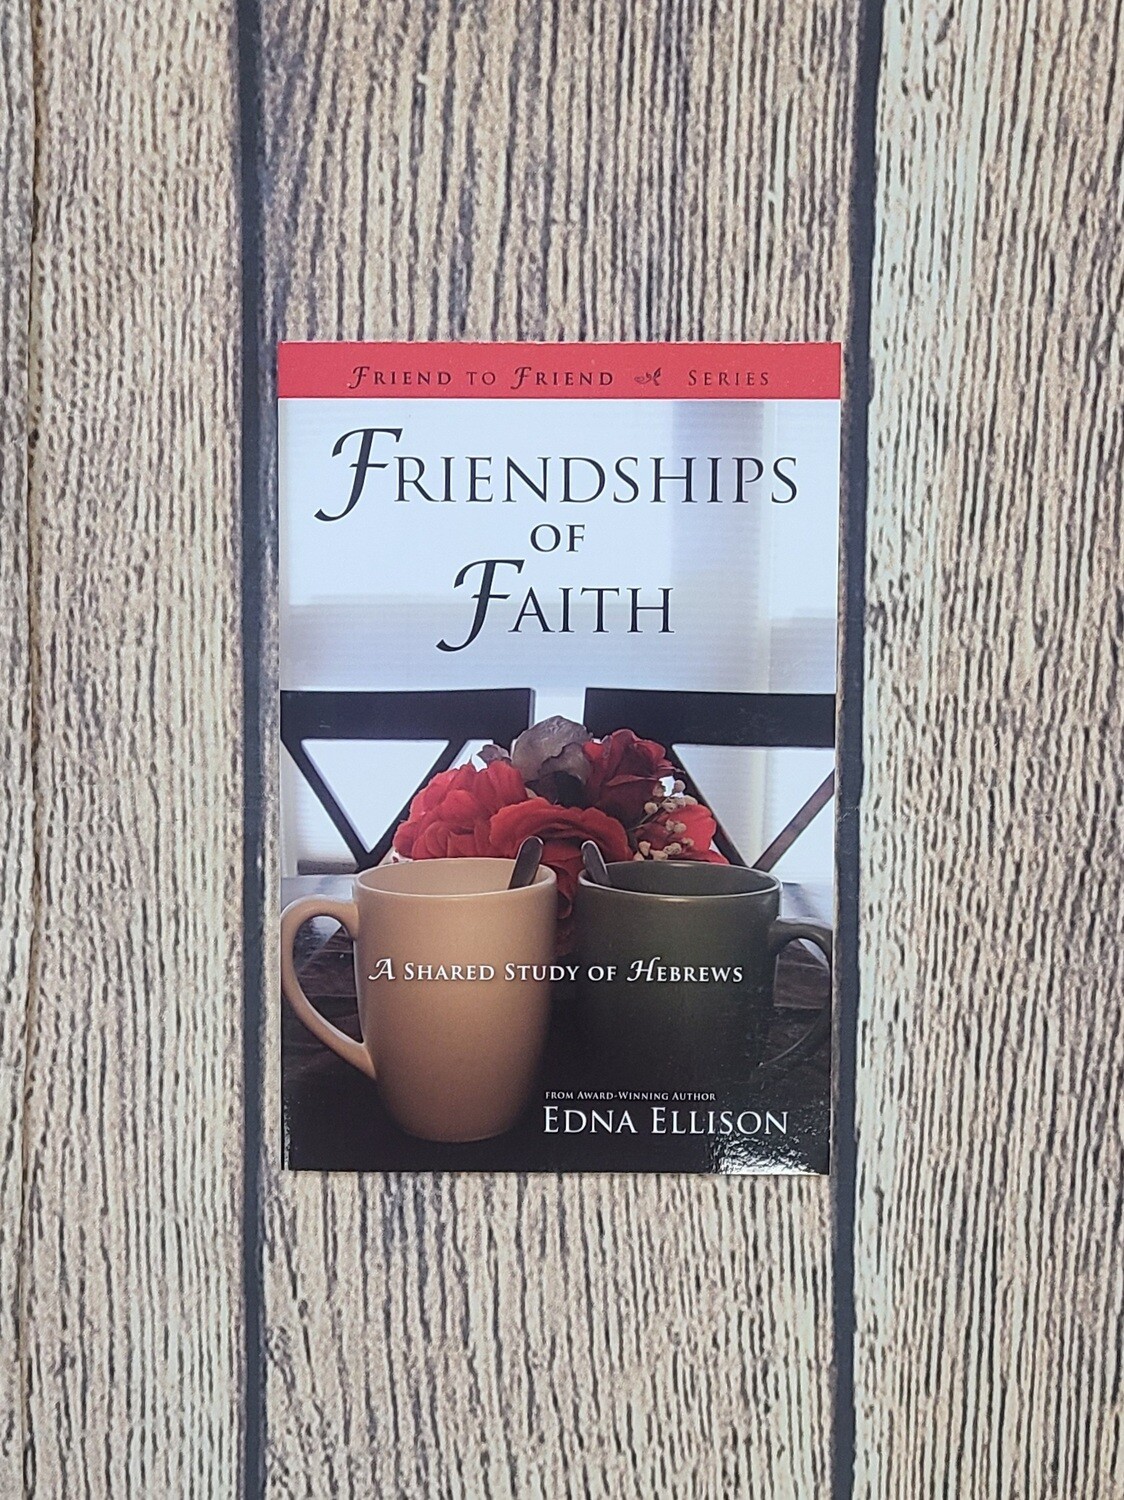 Friendships of Faith: A Shared Study of Hebrews by Edna Ellison